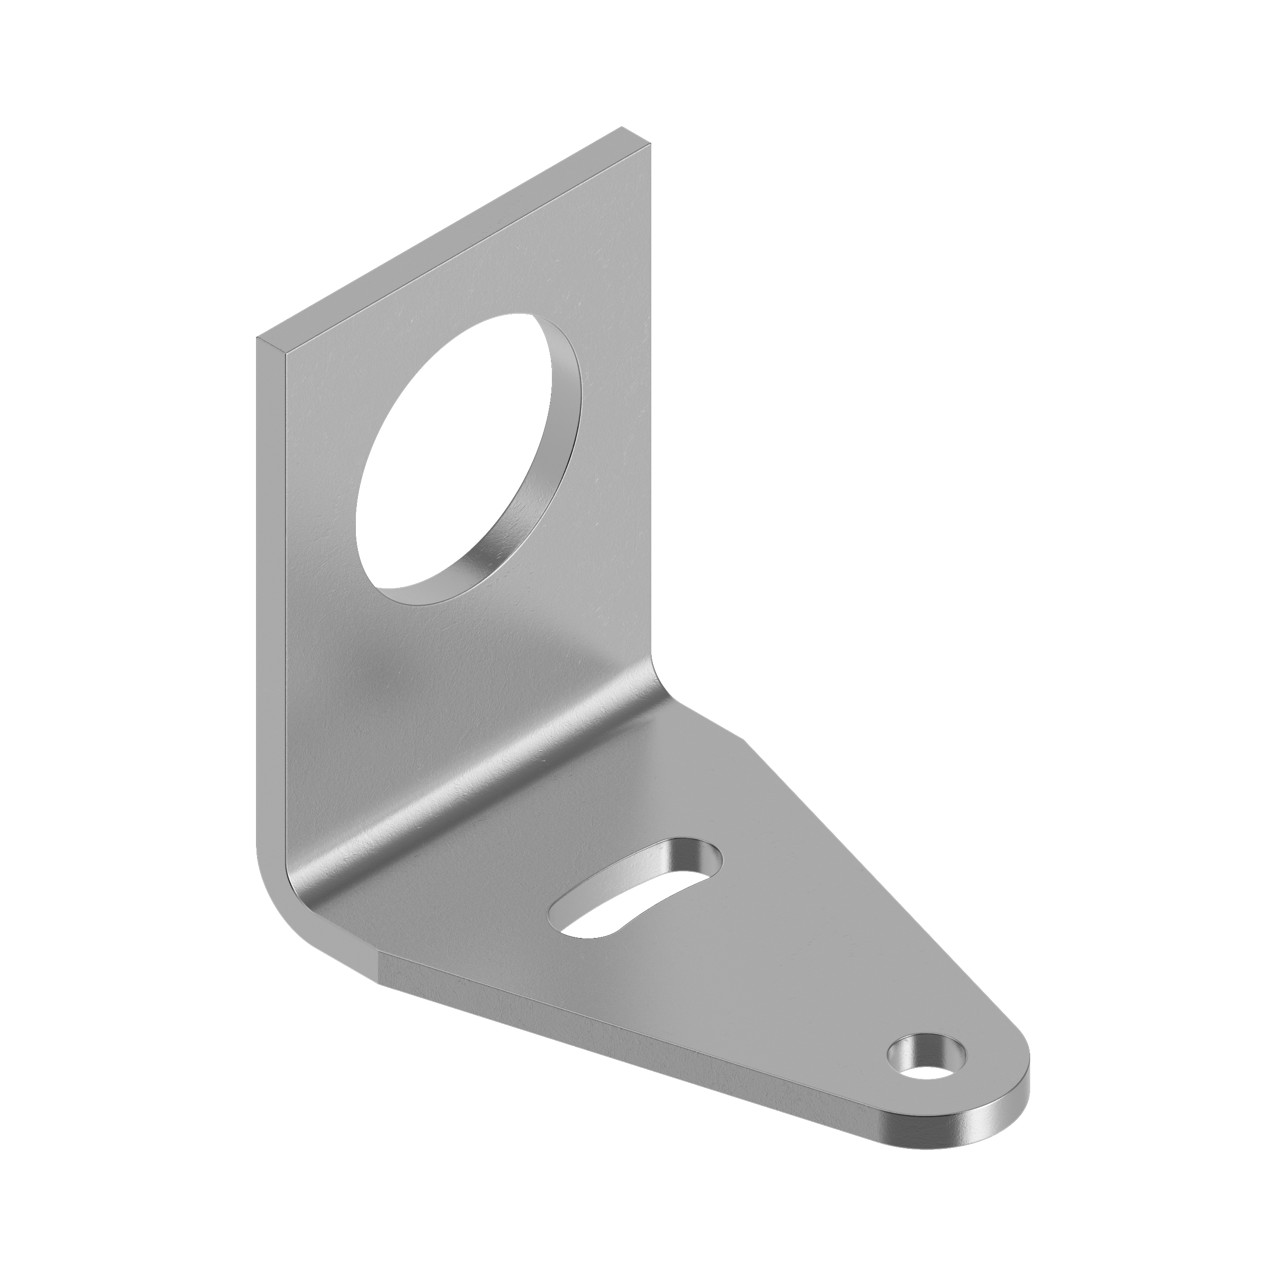 SMB18A - Bracket: 18 mm Right-Angle-mount; Material: 11 Gauge Stainless Steel; Curved mounting slot for versatility/orientation; Clearance for M4 #8 h